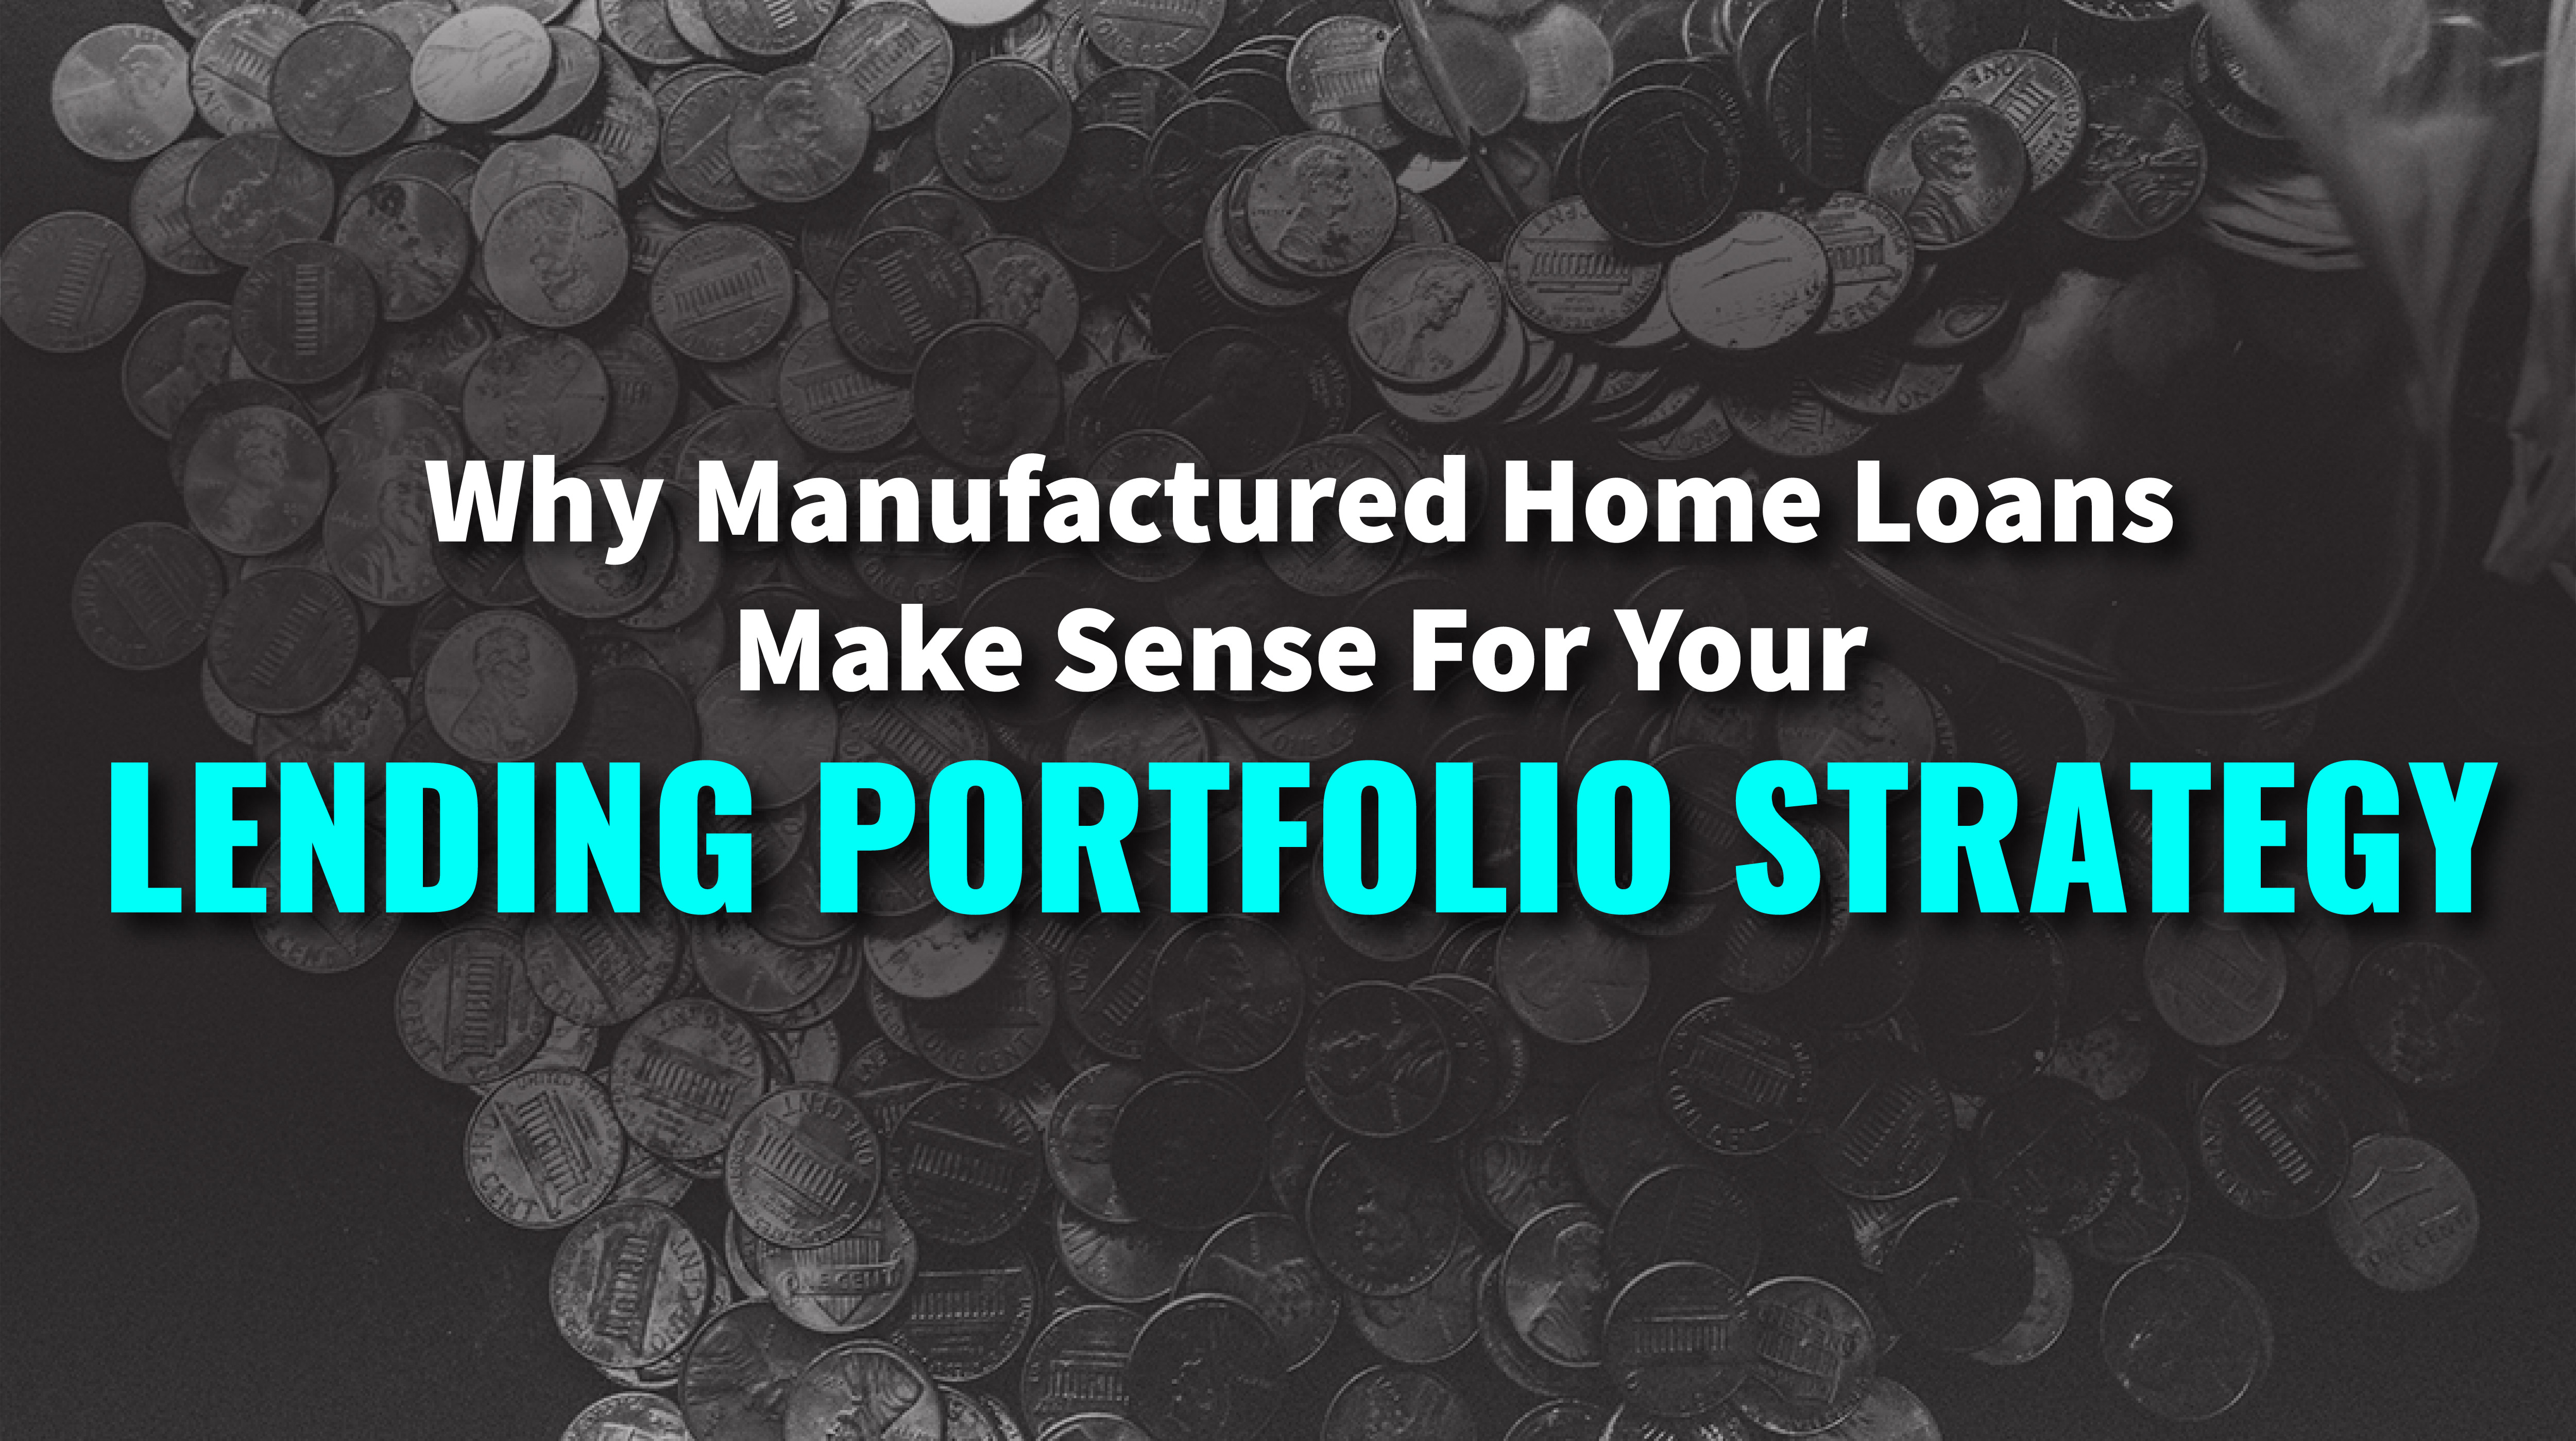 Why Manufactured Home Loans Make Sense For Your Lending Portfolio Strategy